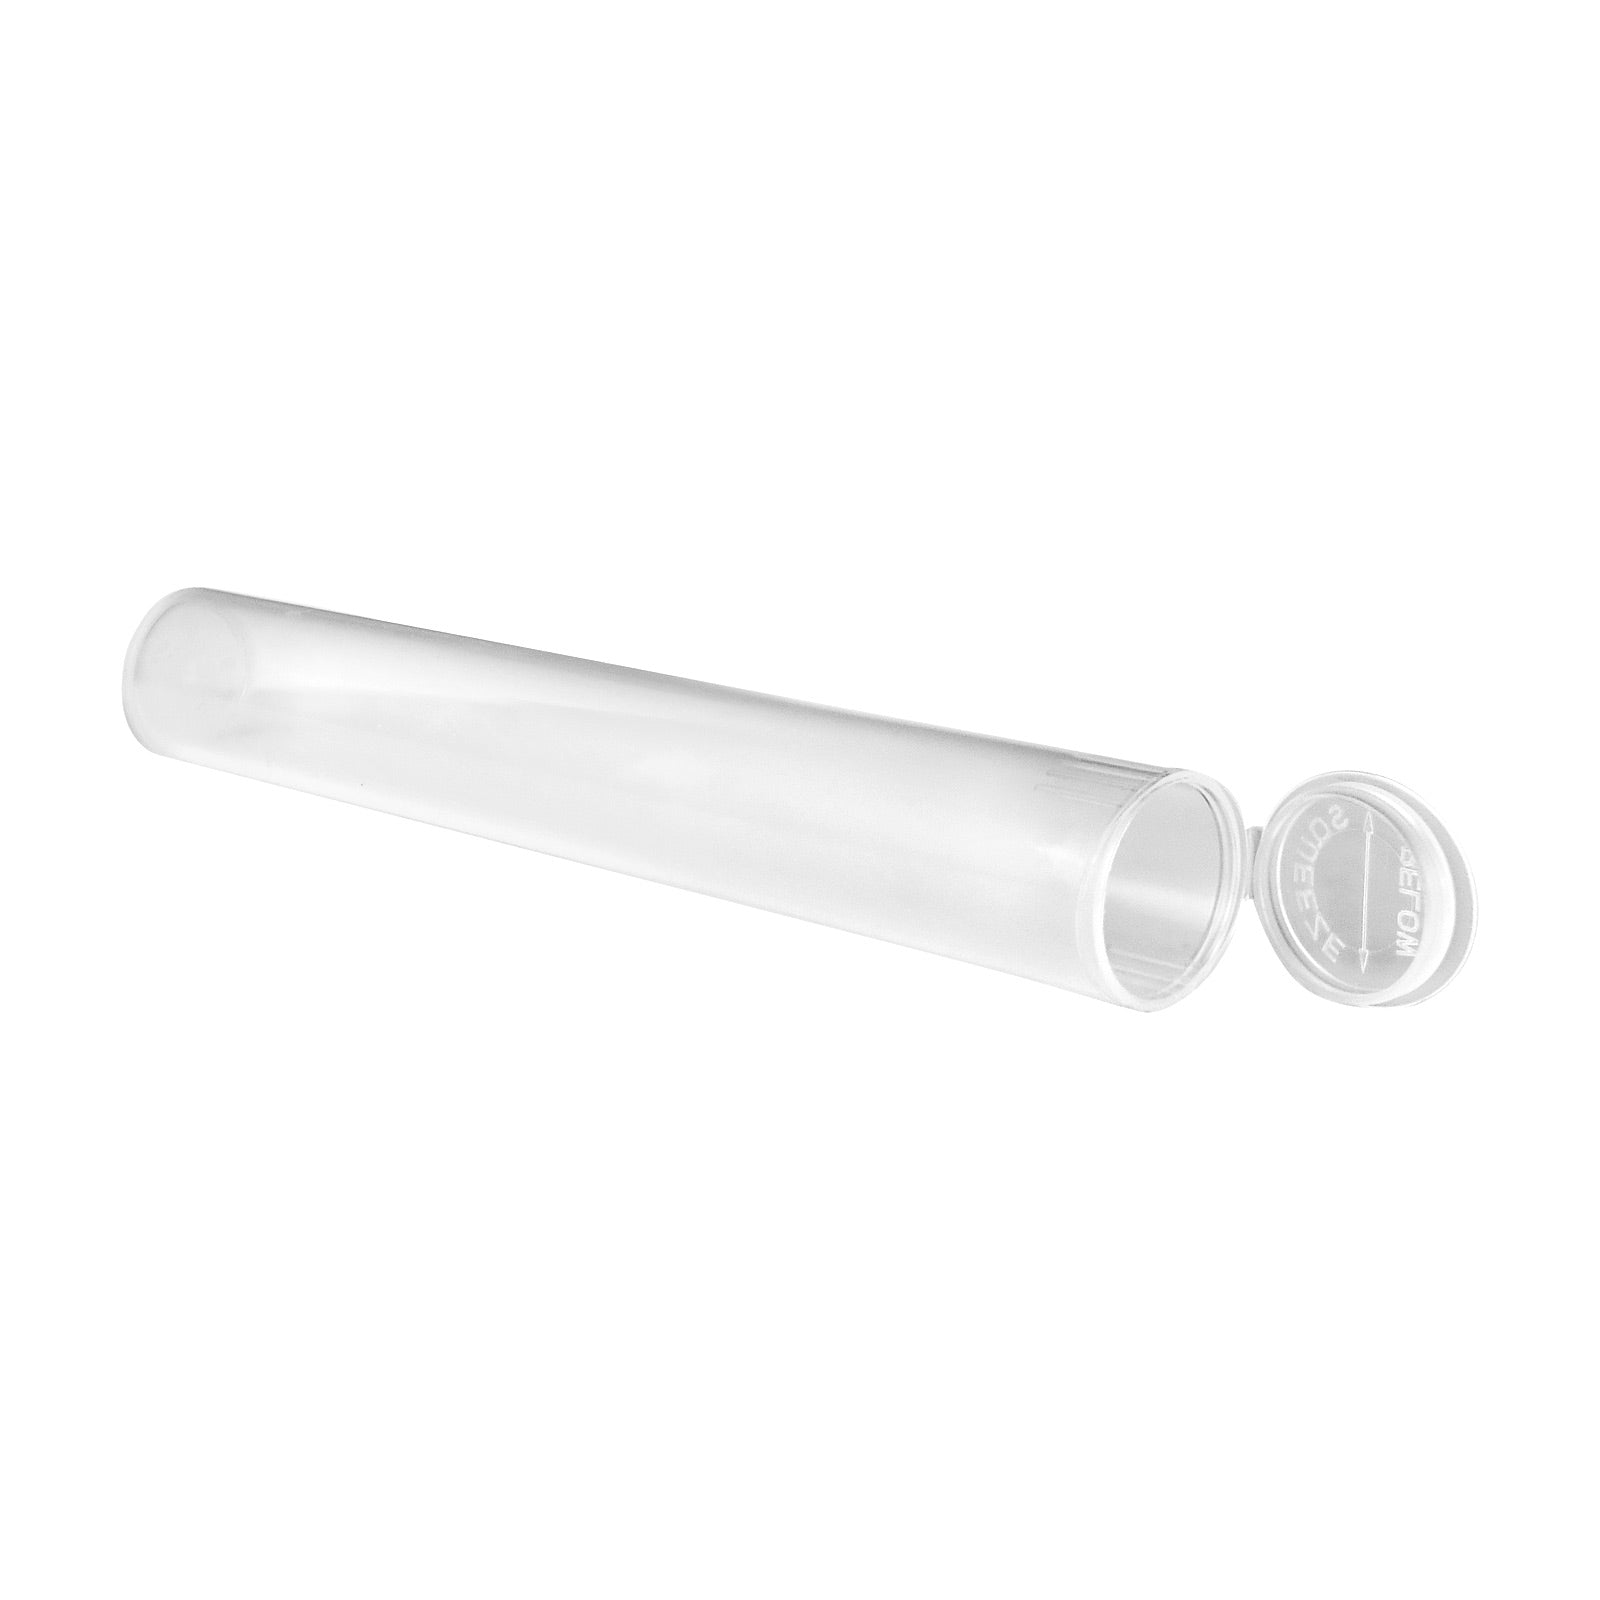 120mm Rx Squeeze Tubes Translucent Clear - 500 Count